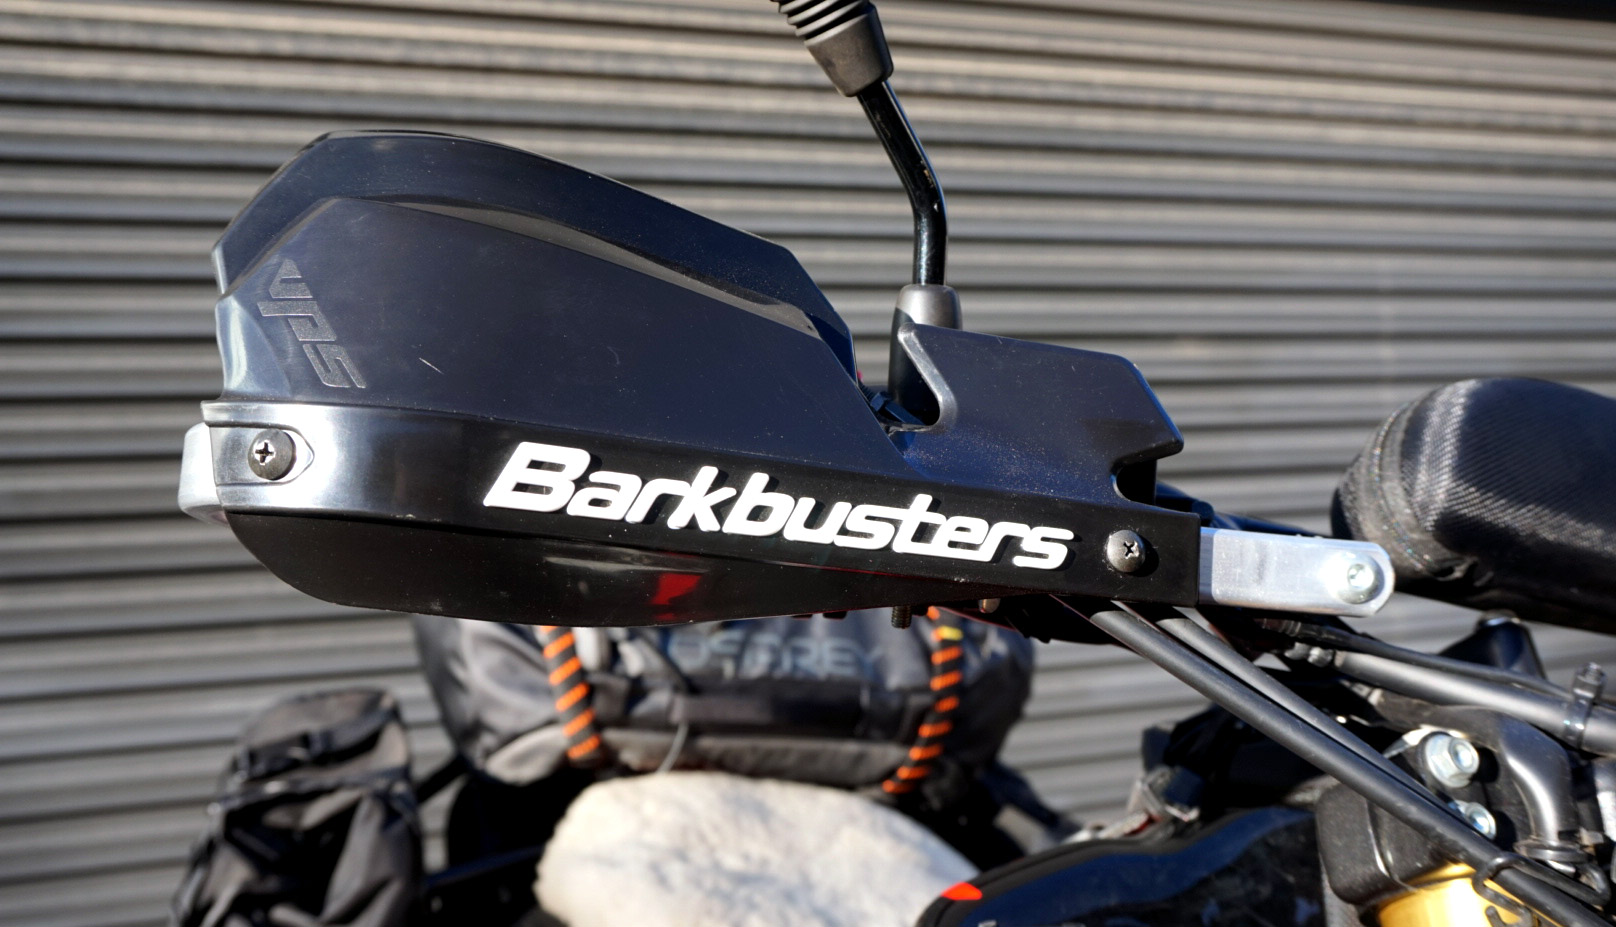 The Barkbusters VPS with wind deflectors attached